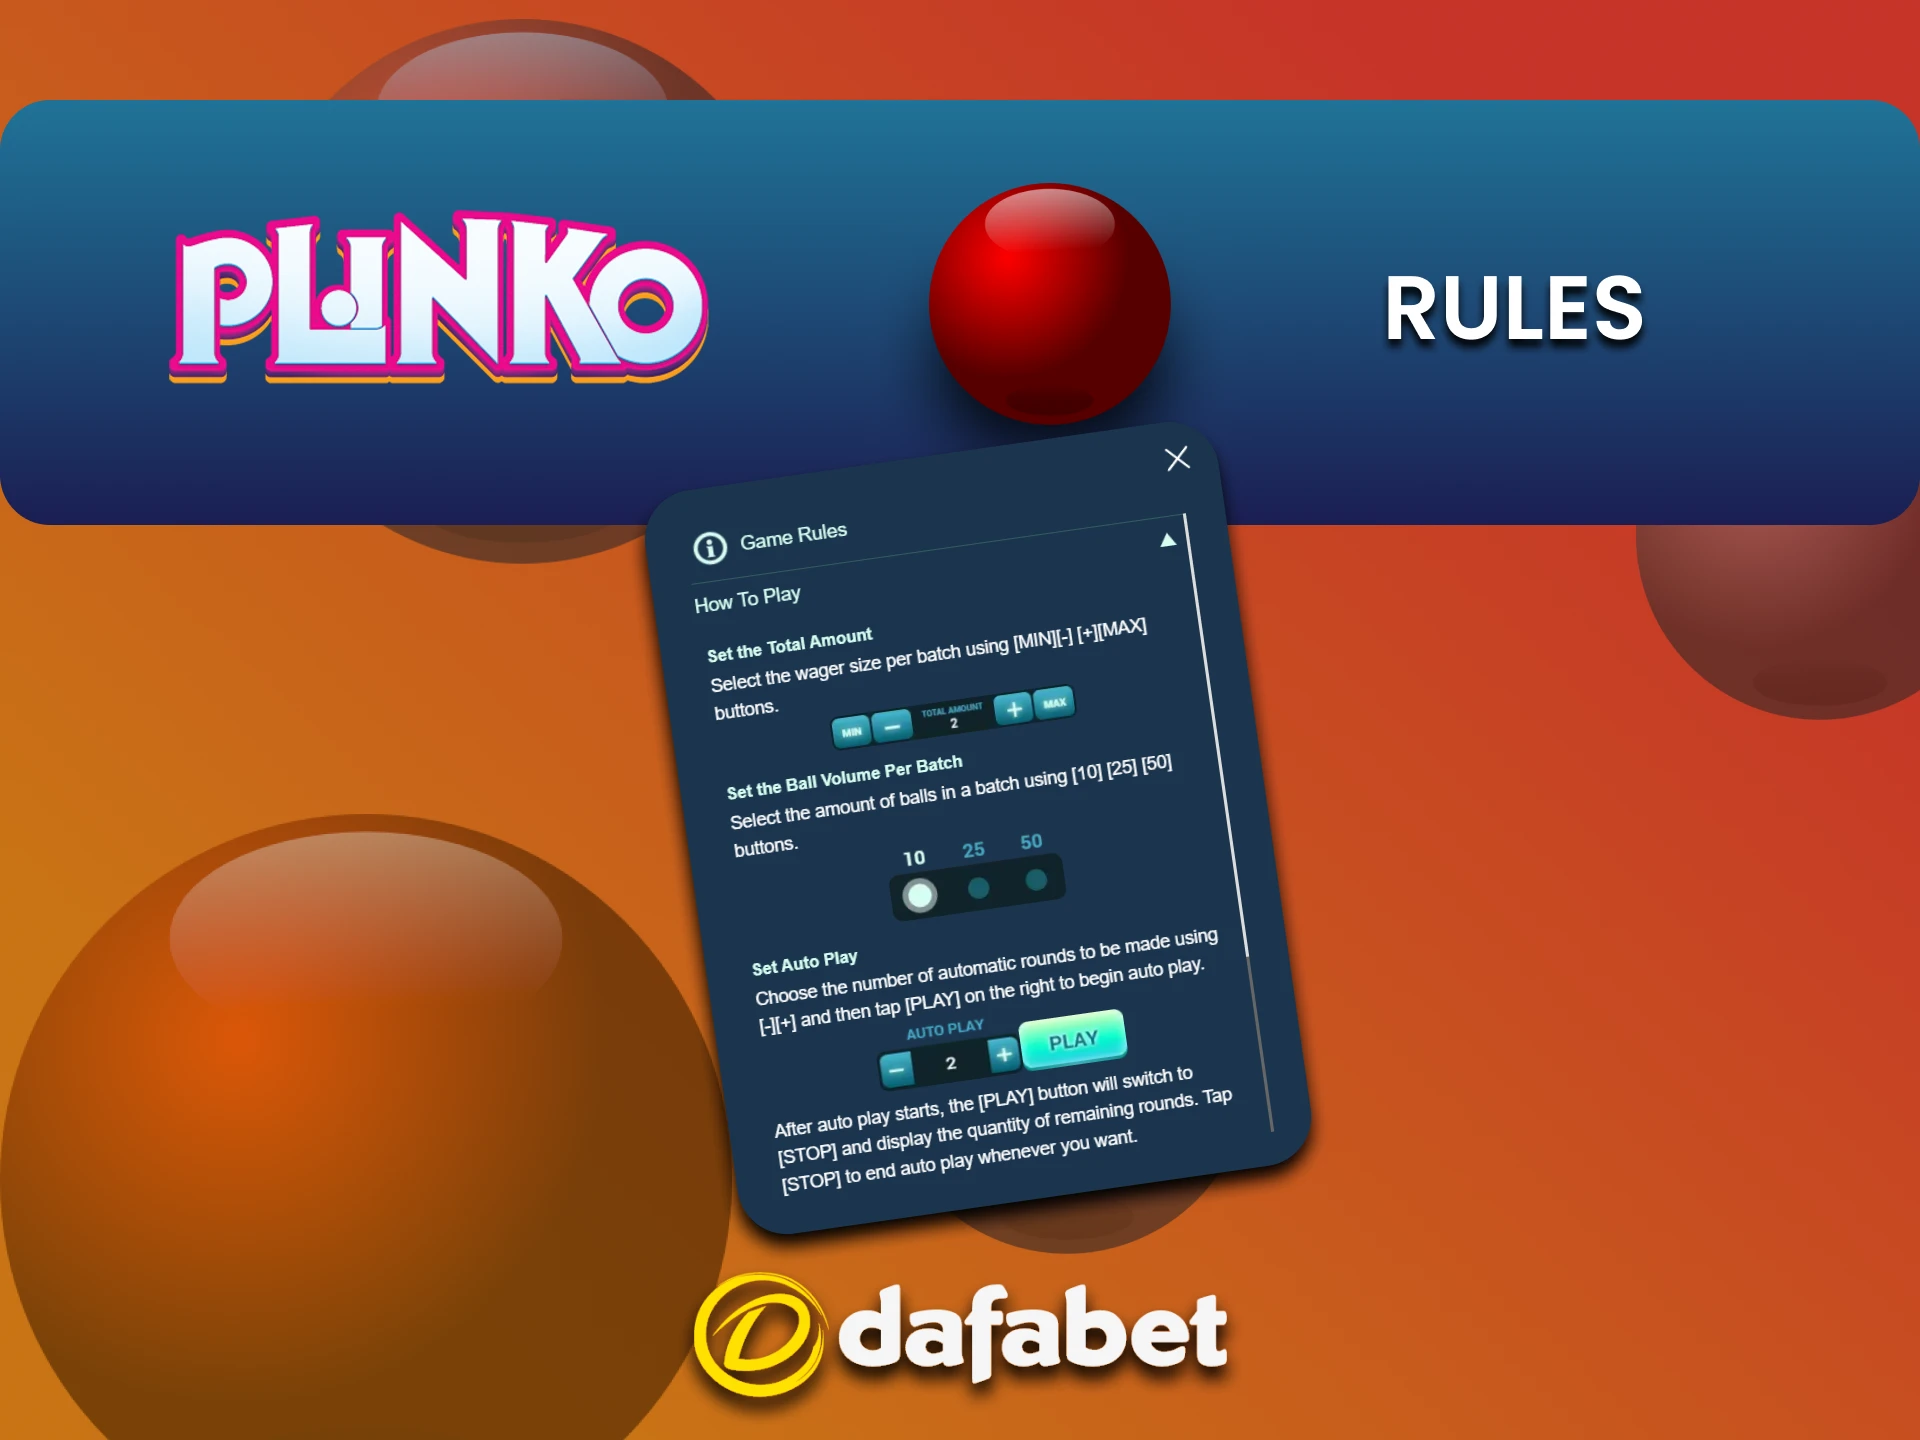 Be sure to study the rules of the Plinko game on Dafabet.